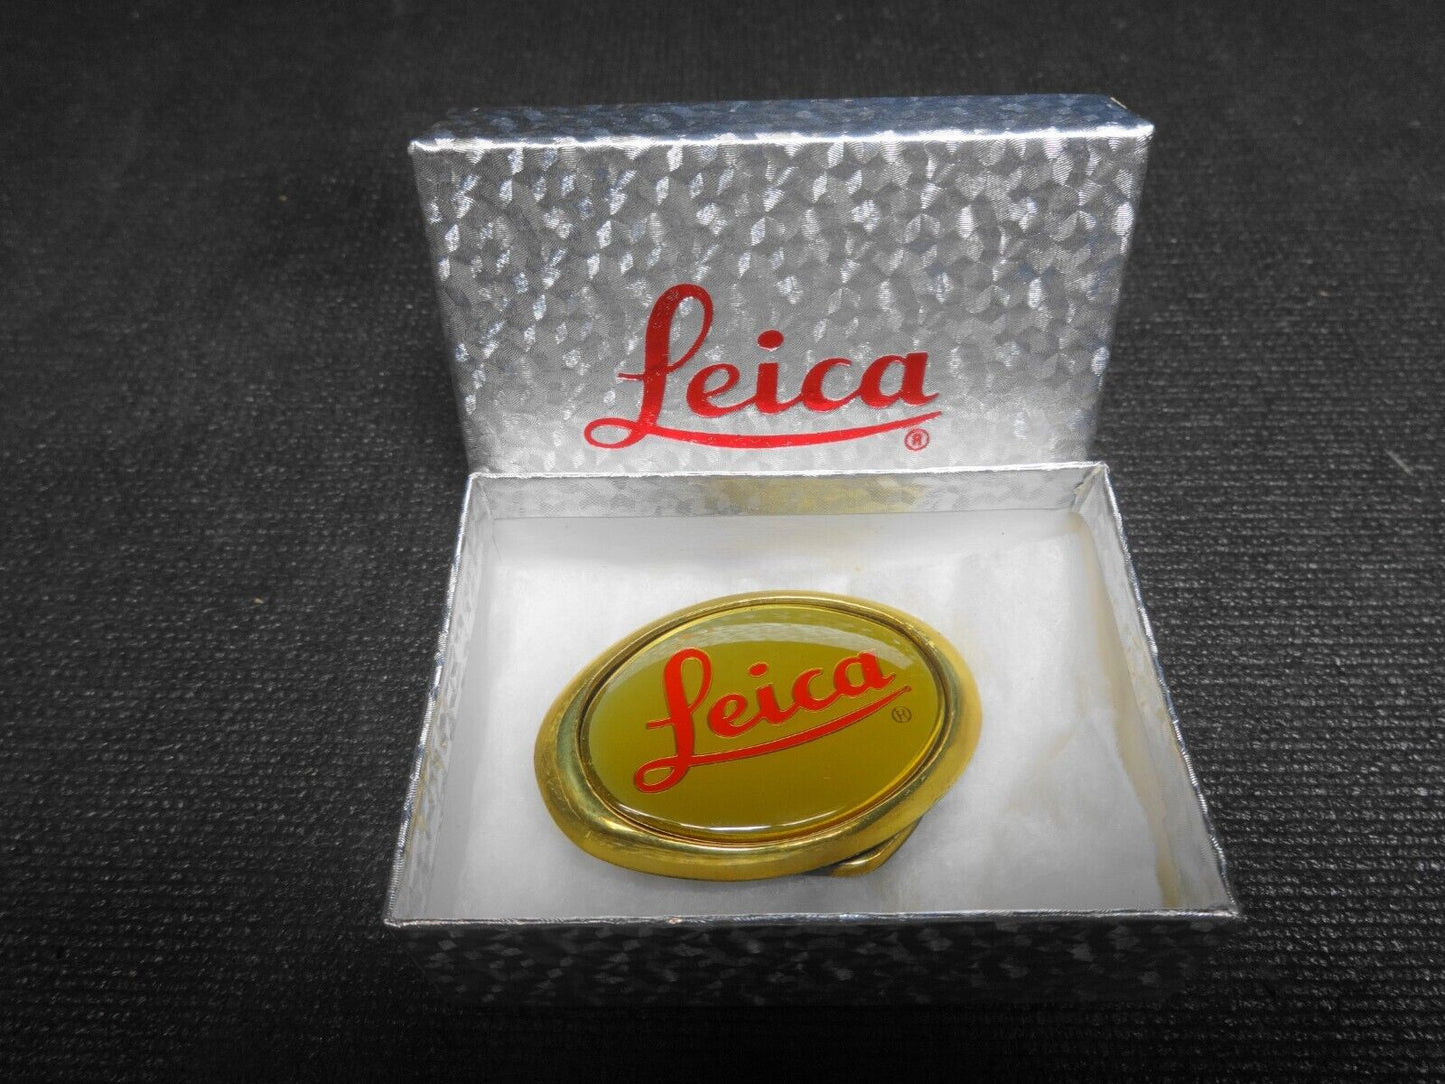 Vintage 1980's LEICA CAMERA Brass Belt Buckle for up to 1.25" Inch Belt w/ Box